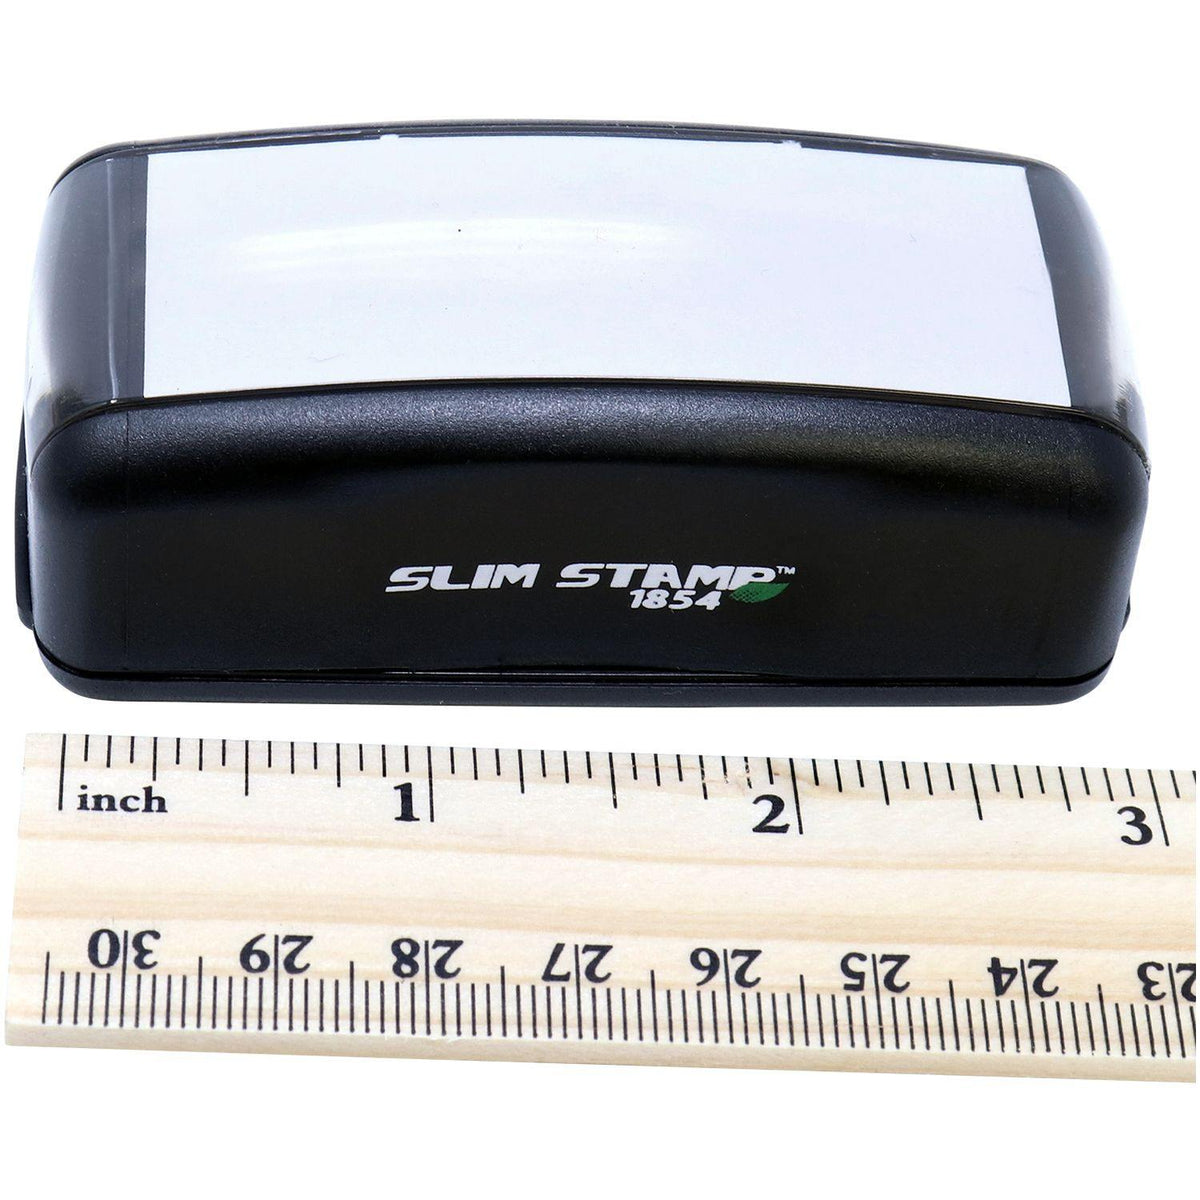 Measurement Large Pre-Inked Please Pay Now No Statements will be Sent Stamp with Ruler